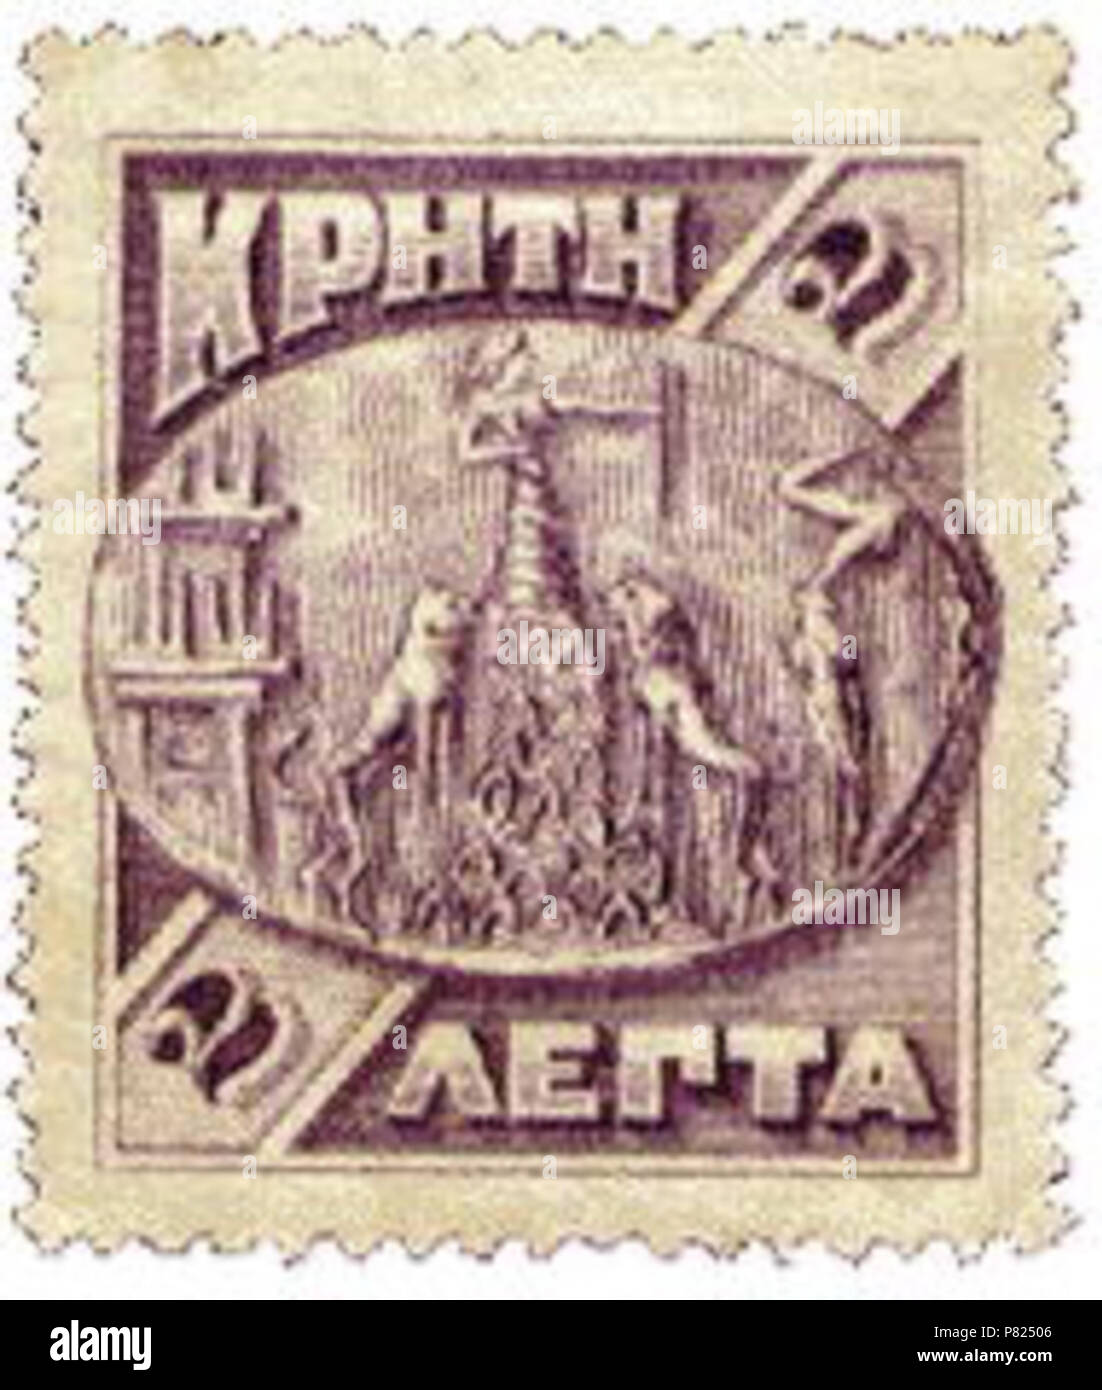 Definitive postage stamp of the Cretan State, second set, 1905. Shows Artemis firing a bow, from a relief in Knossos. 2 February 1905 99 Crete 2 lepta 1905 Stock Photo